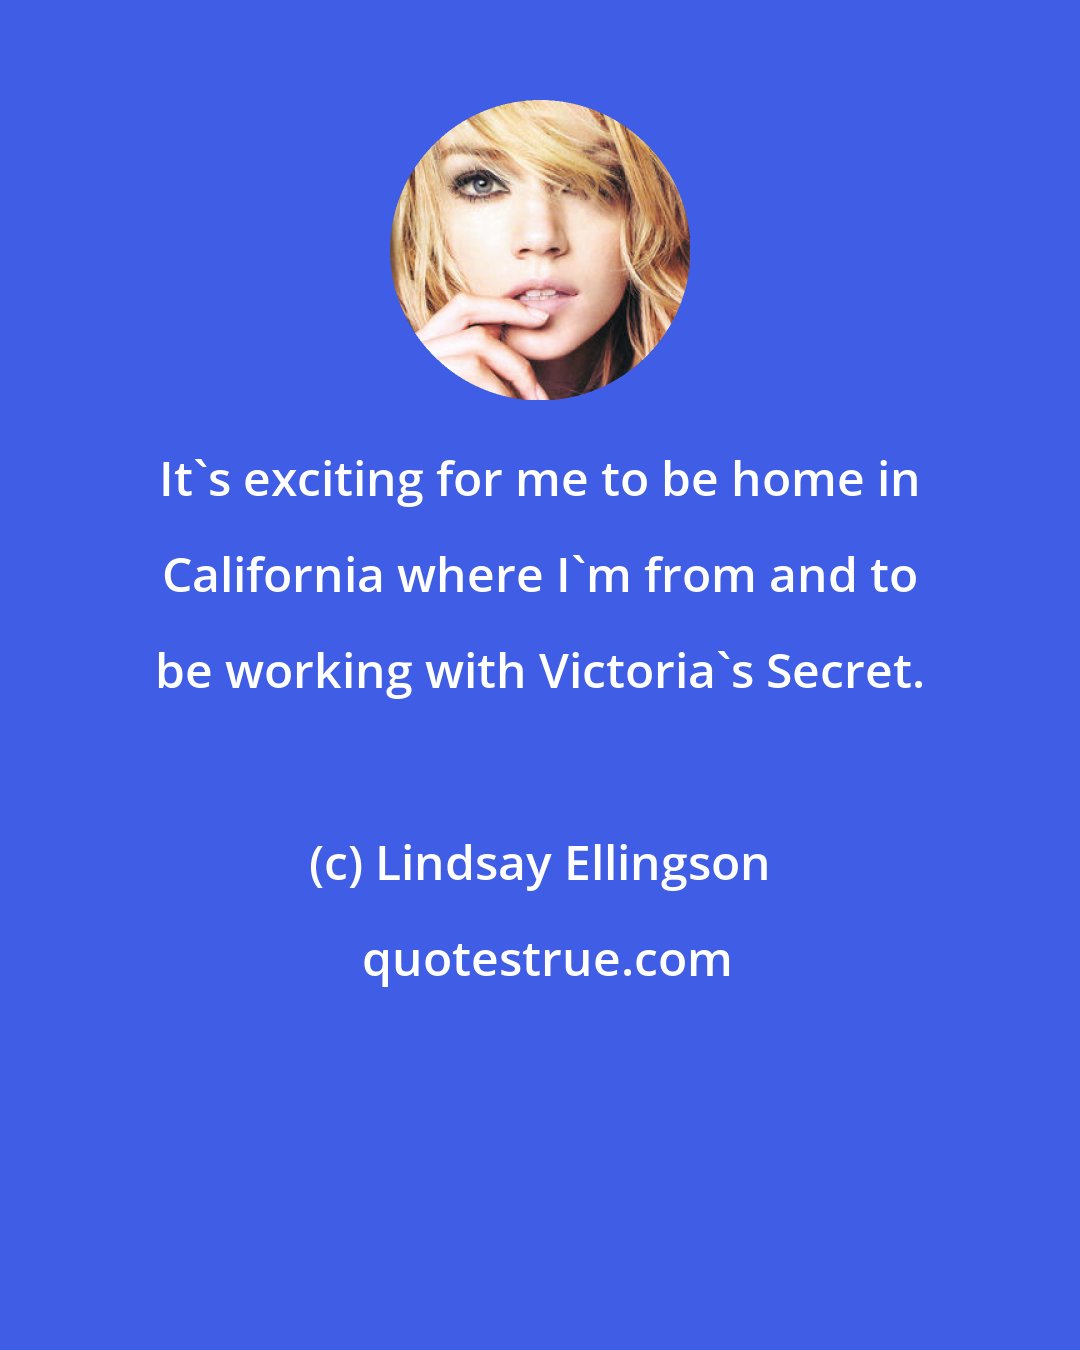 Lindsay Ellingson: It's exciting for me to be home in California where I'm from and to be working with Victoria's Secret.